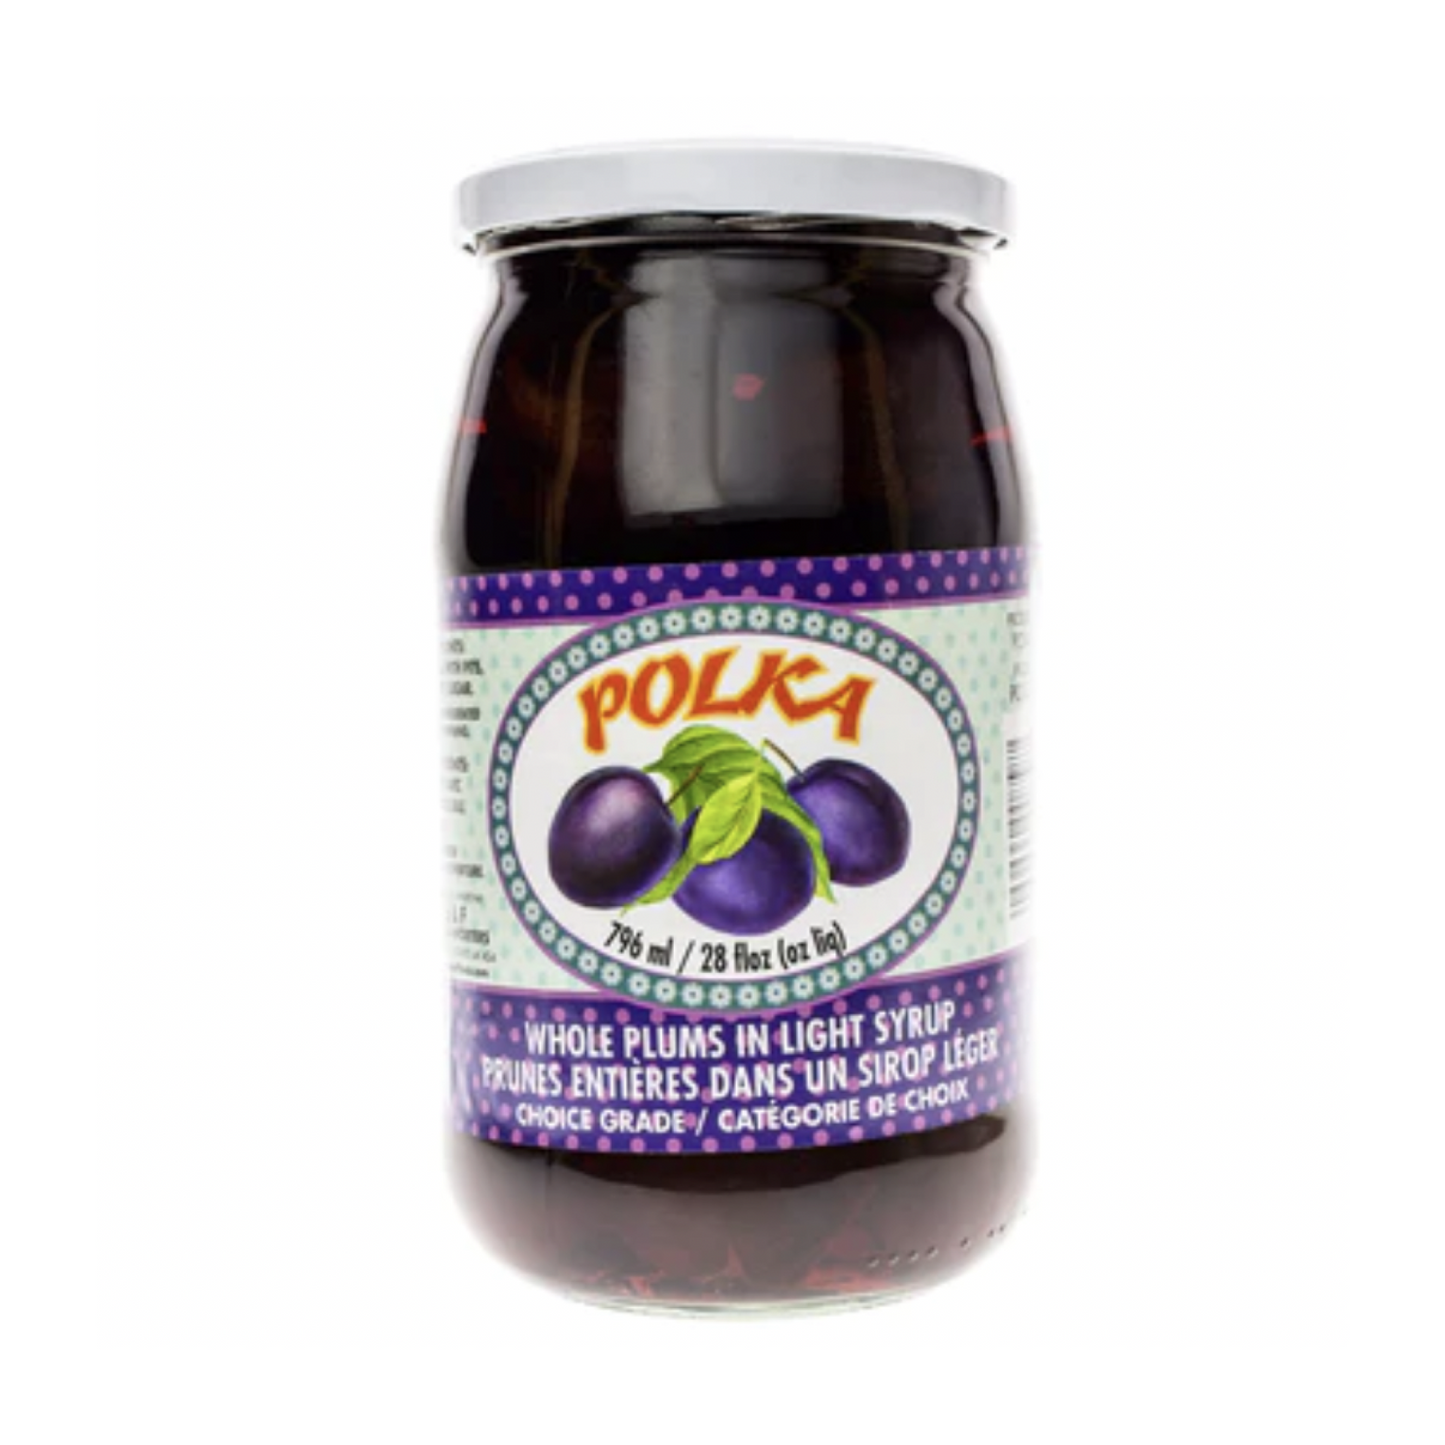 Polka Whole Plums in Light Syrup 796ml